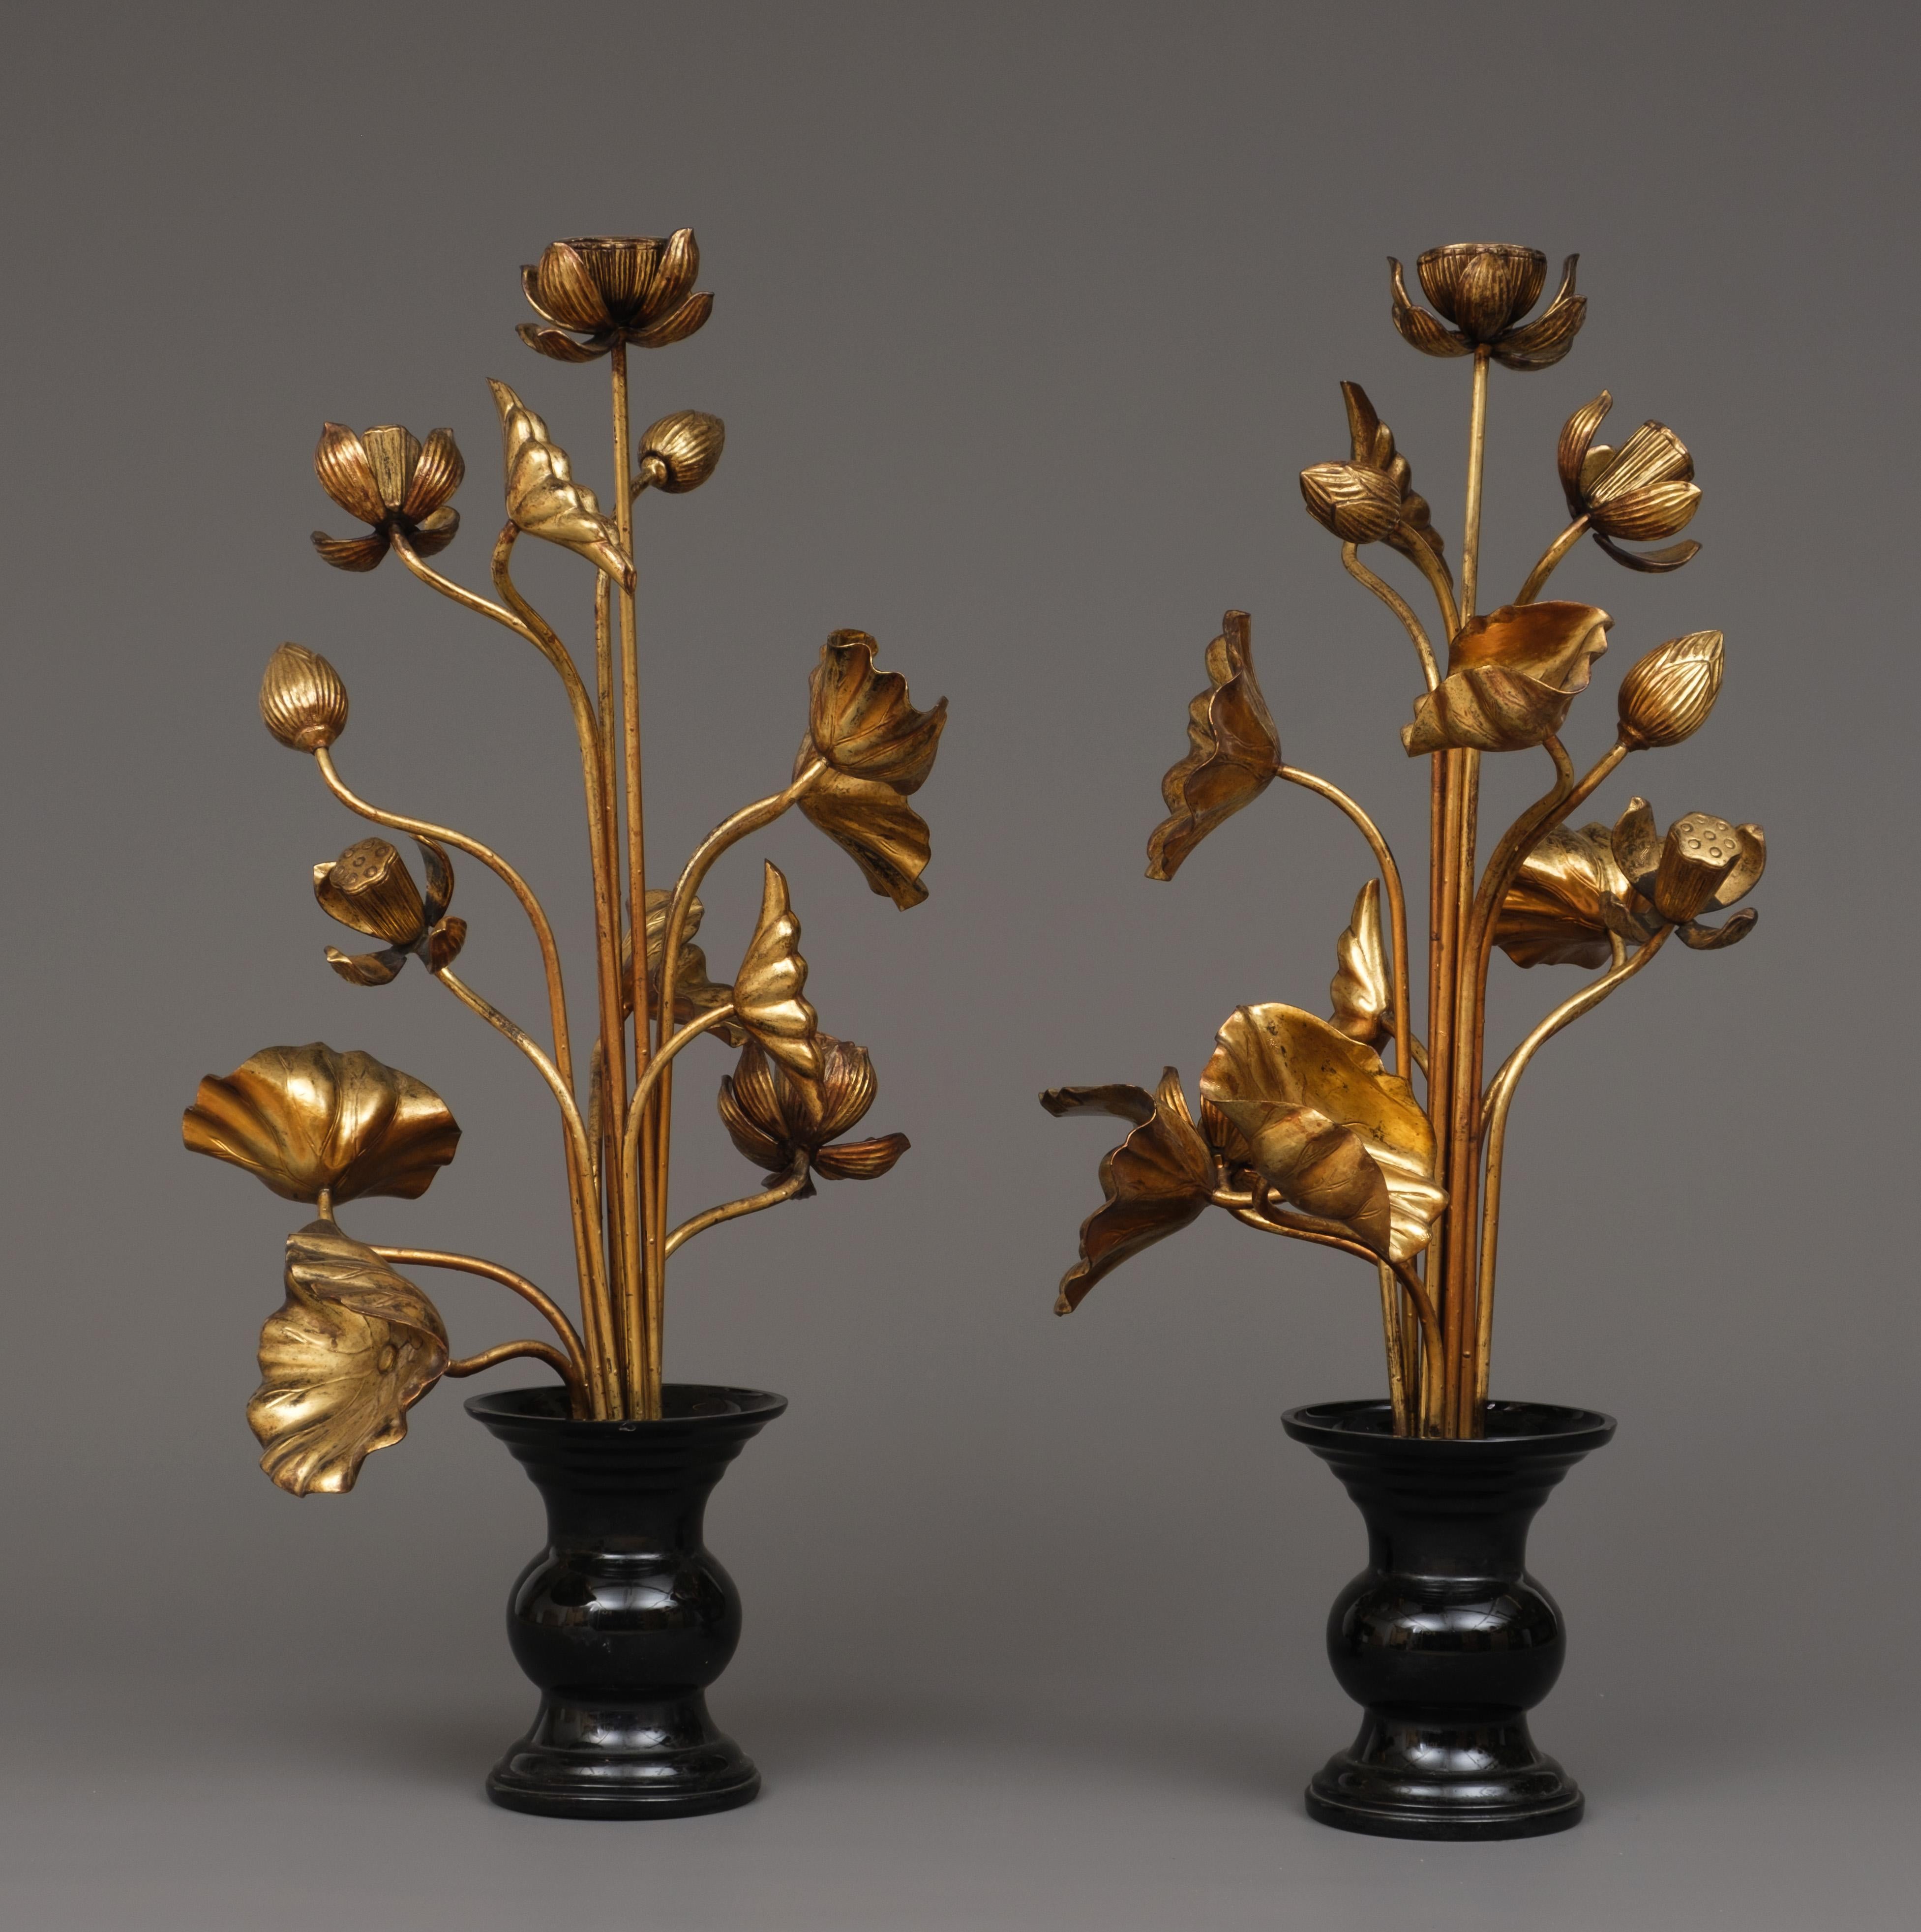 Glass Large pair of Japanese ‘Jyôka’ 常花, sets of gilded lotus flowers and -leaves. For Sale